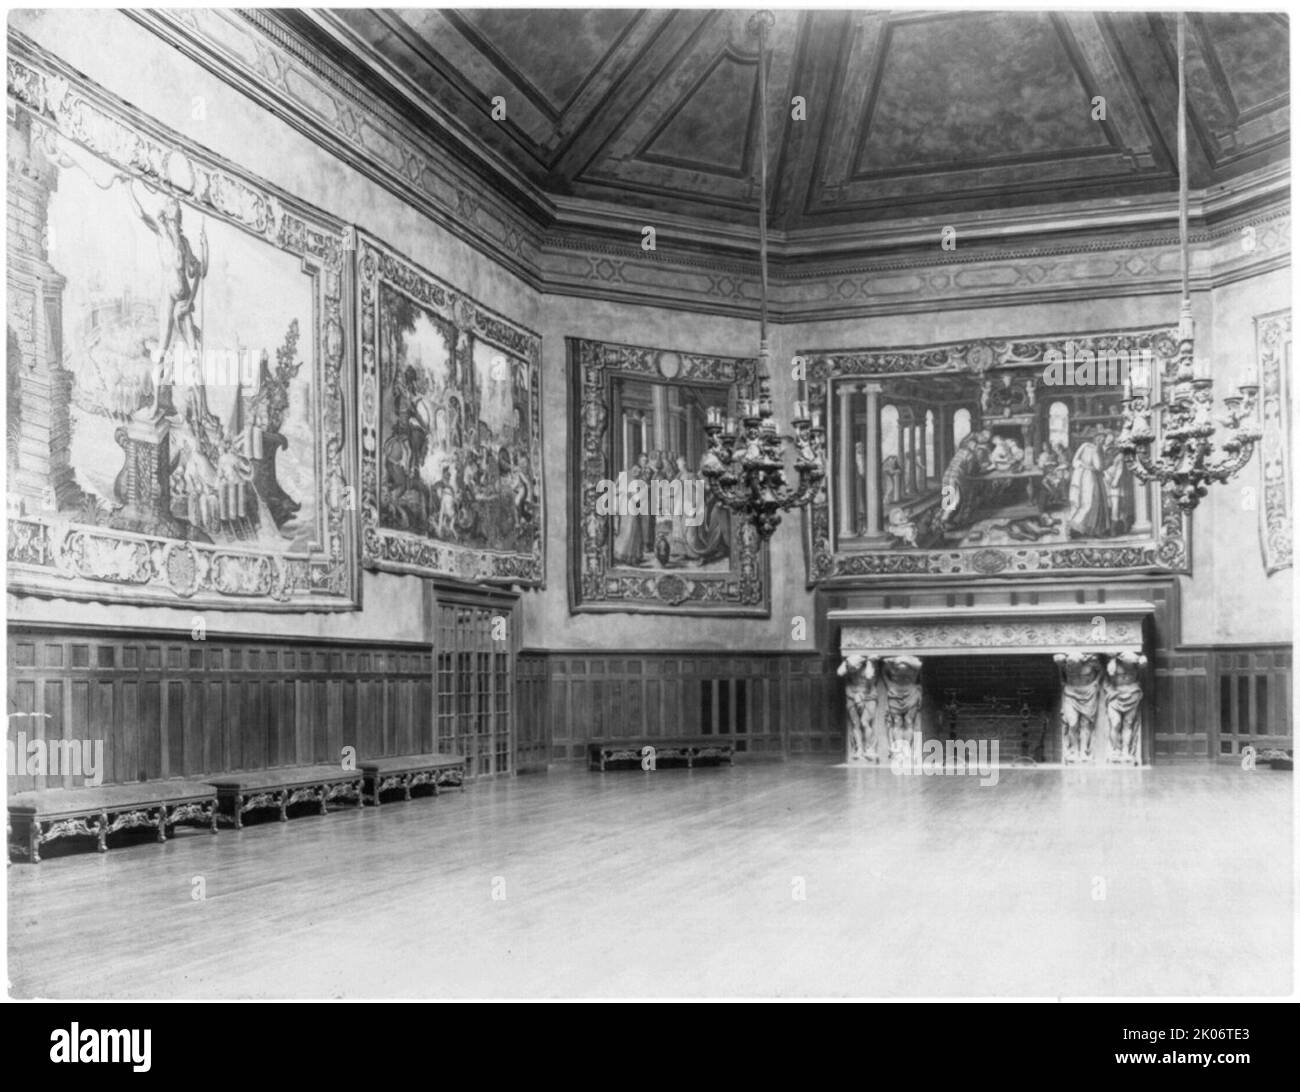 Interior of John R. McLean House, 1500 I St., N.W., Washington, D.C. - view of ballroom showing fireplace and four tapestries, c1907. Stock Photo